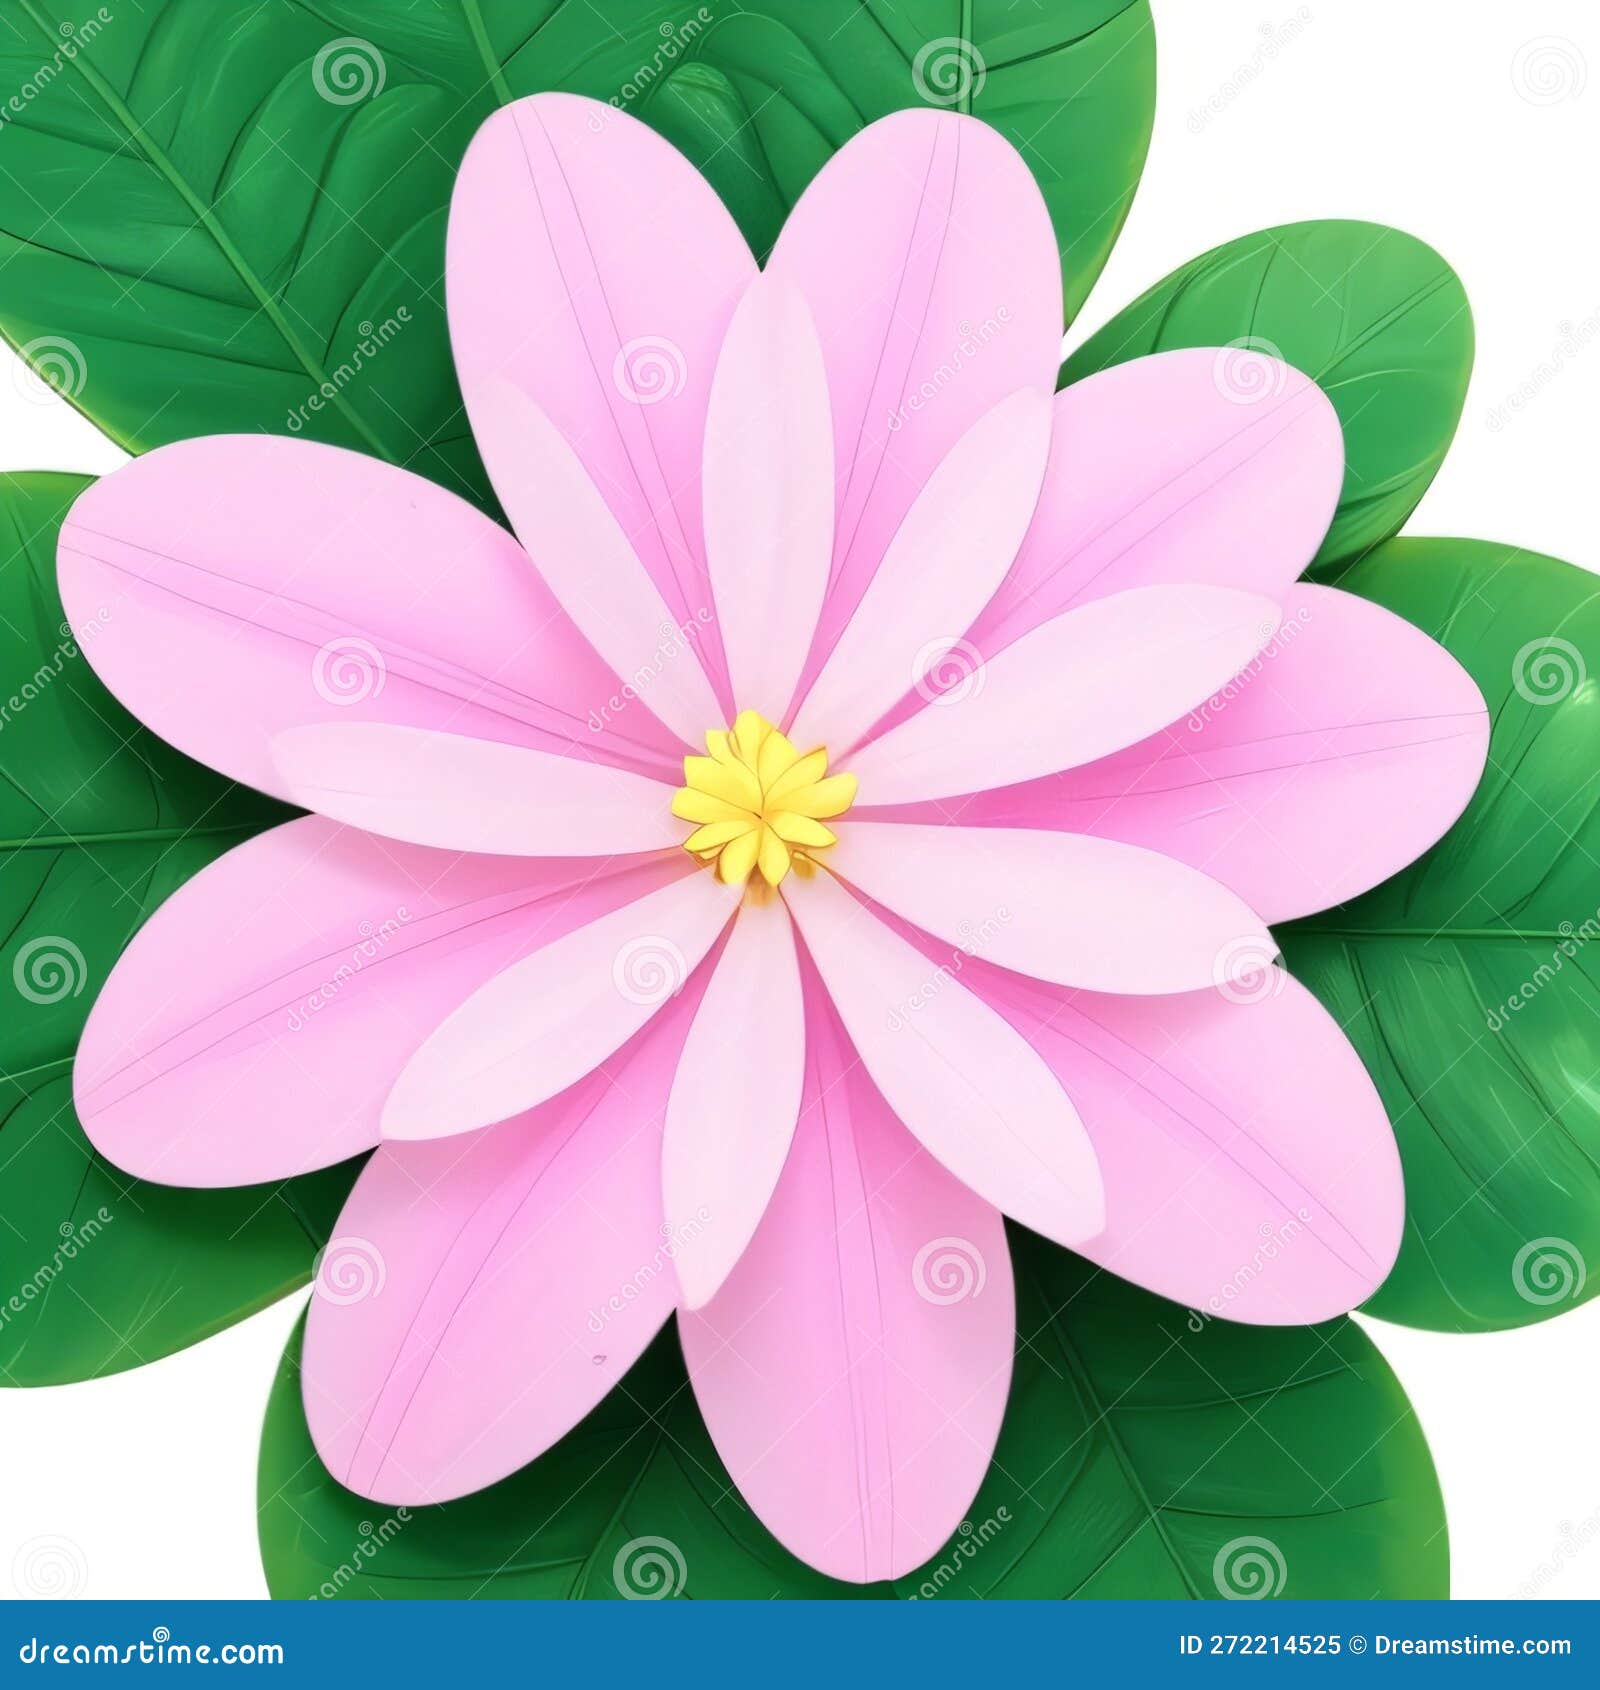 Illustration of Pink and White Flowers, Pink and White Background Stock ...